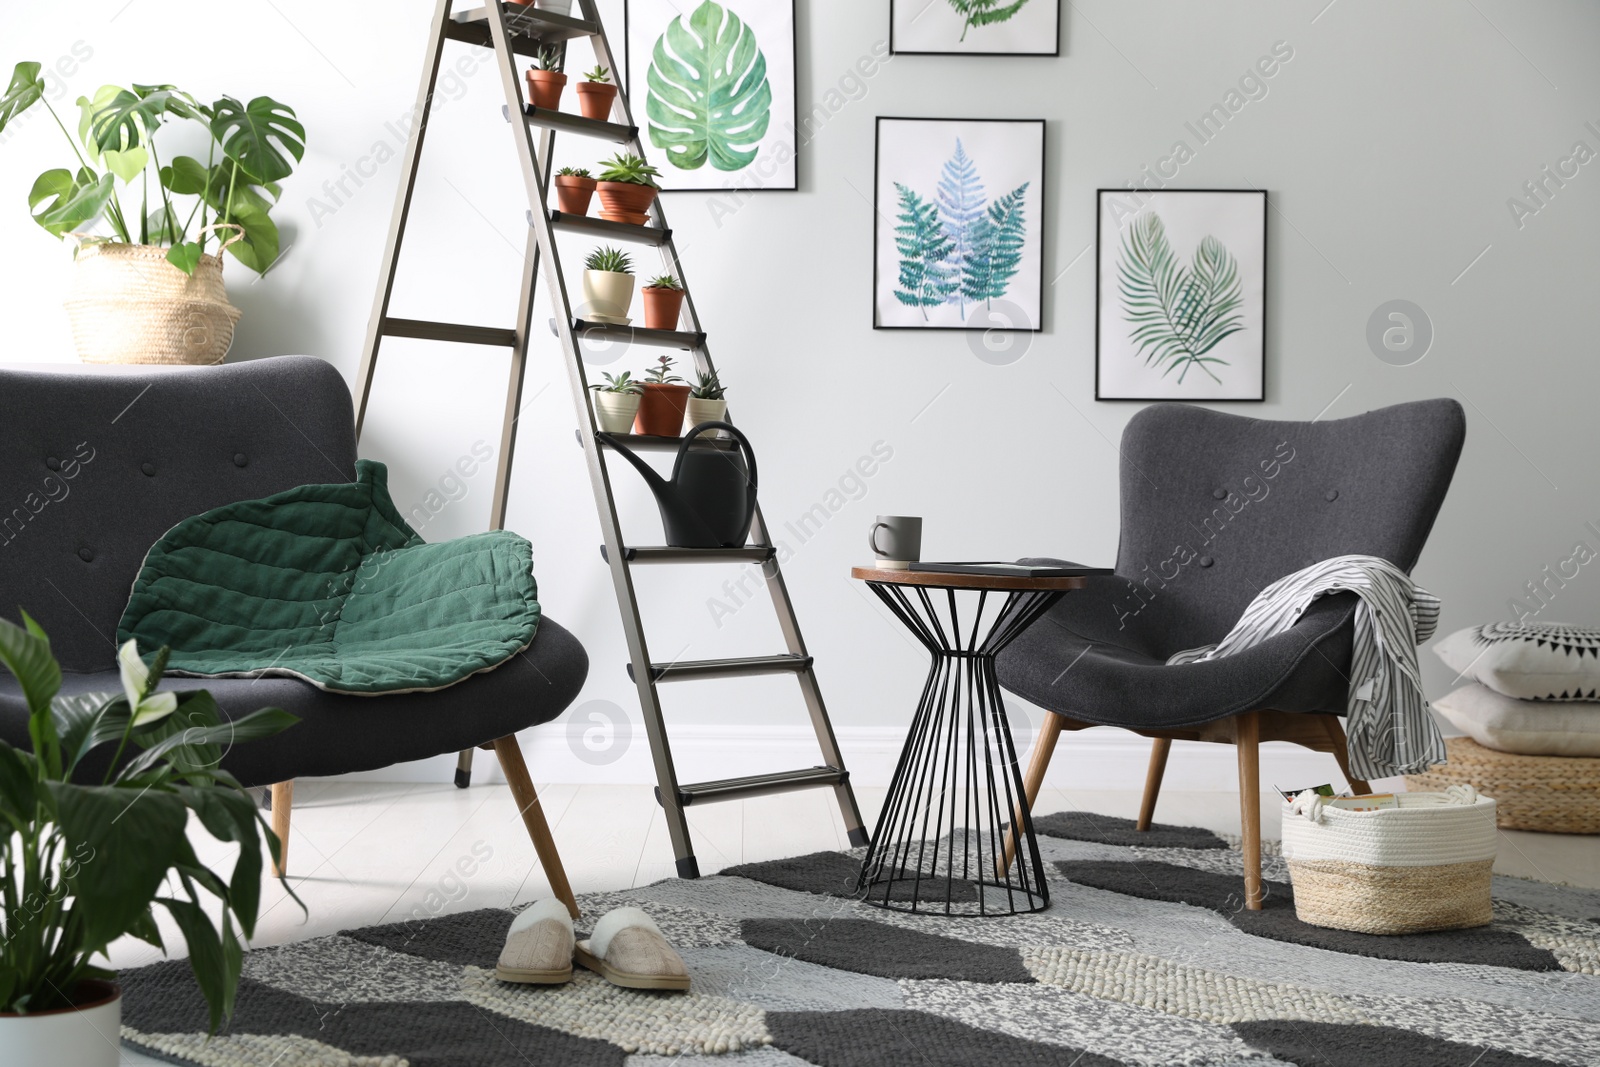 Photo of Stylish living room interior with decorative ladder